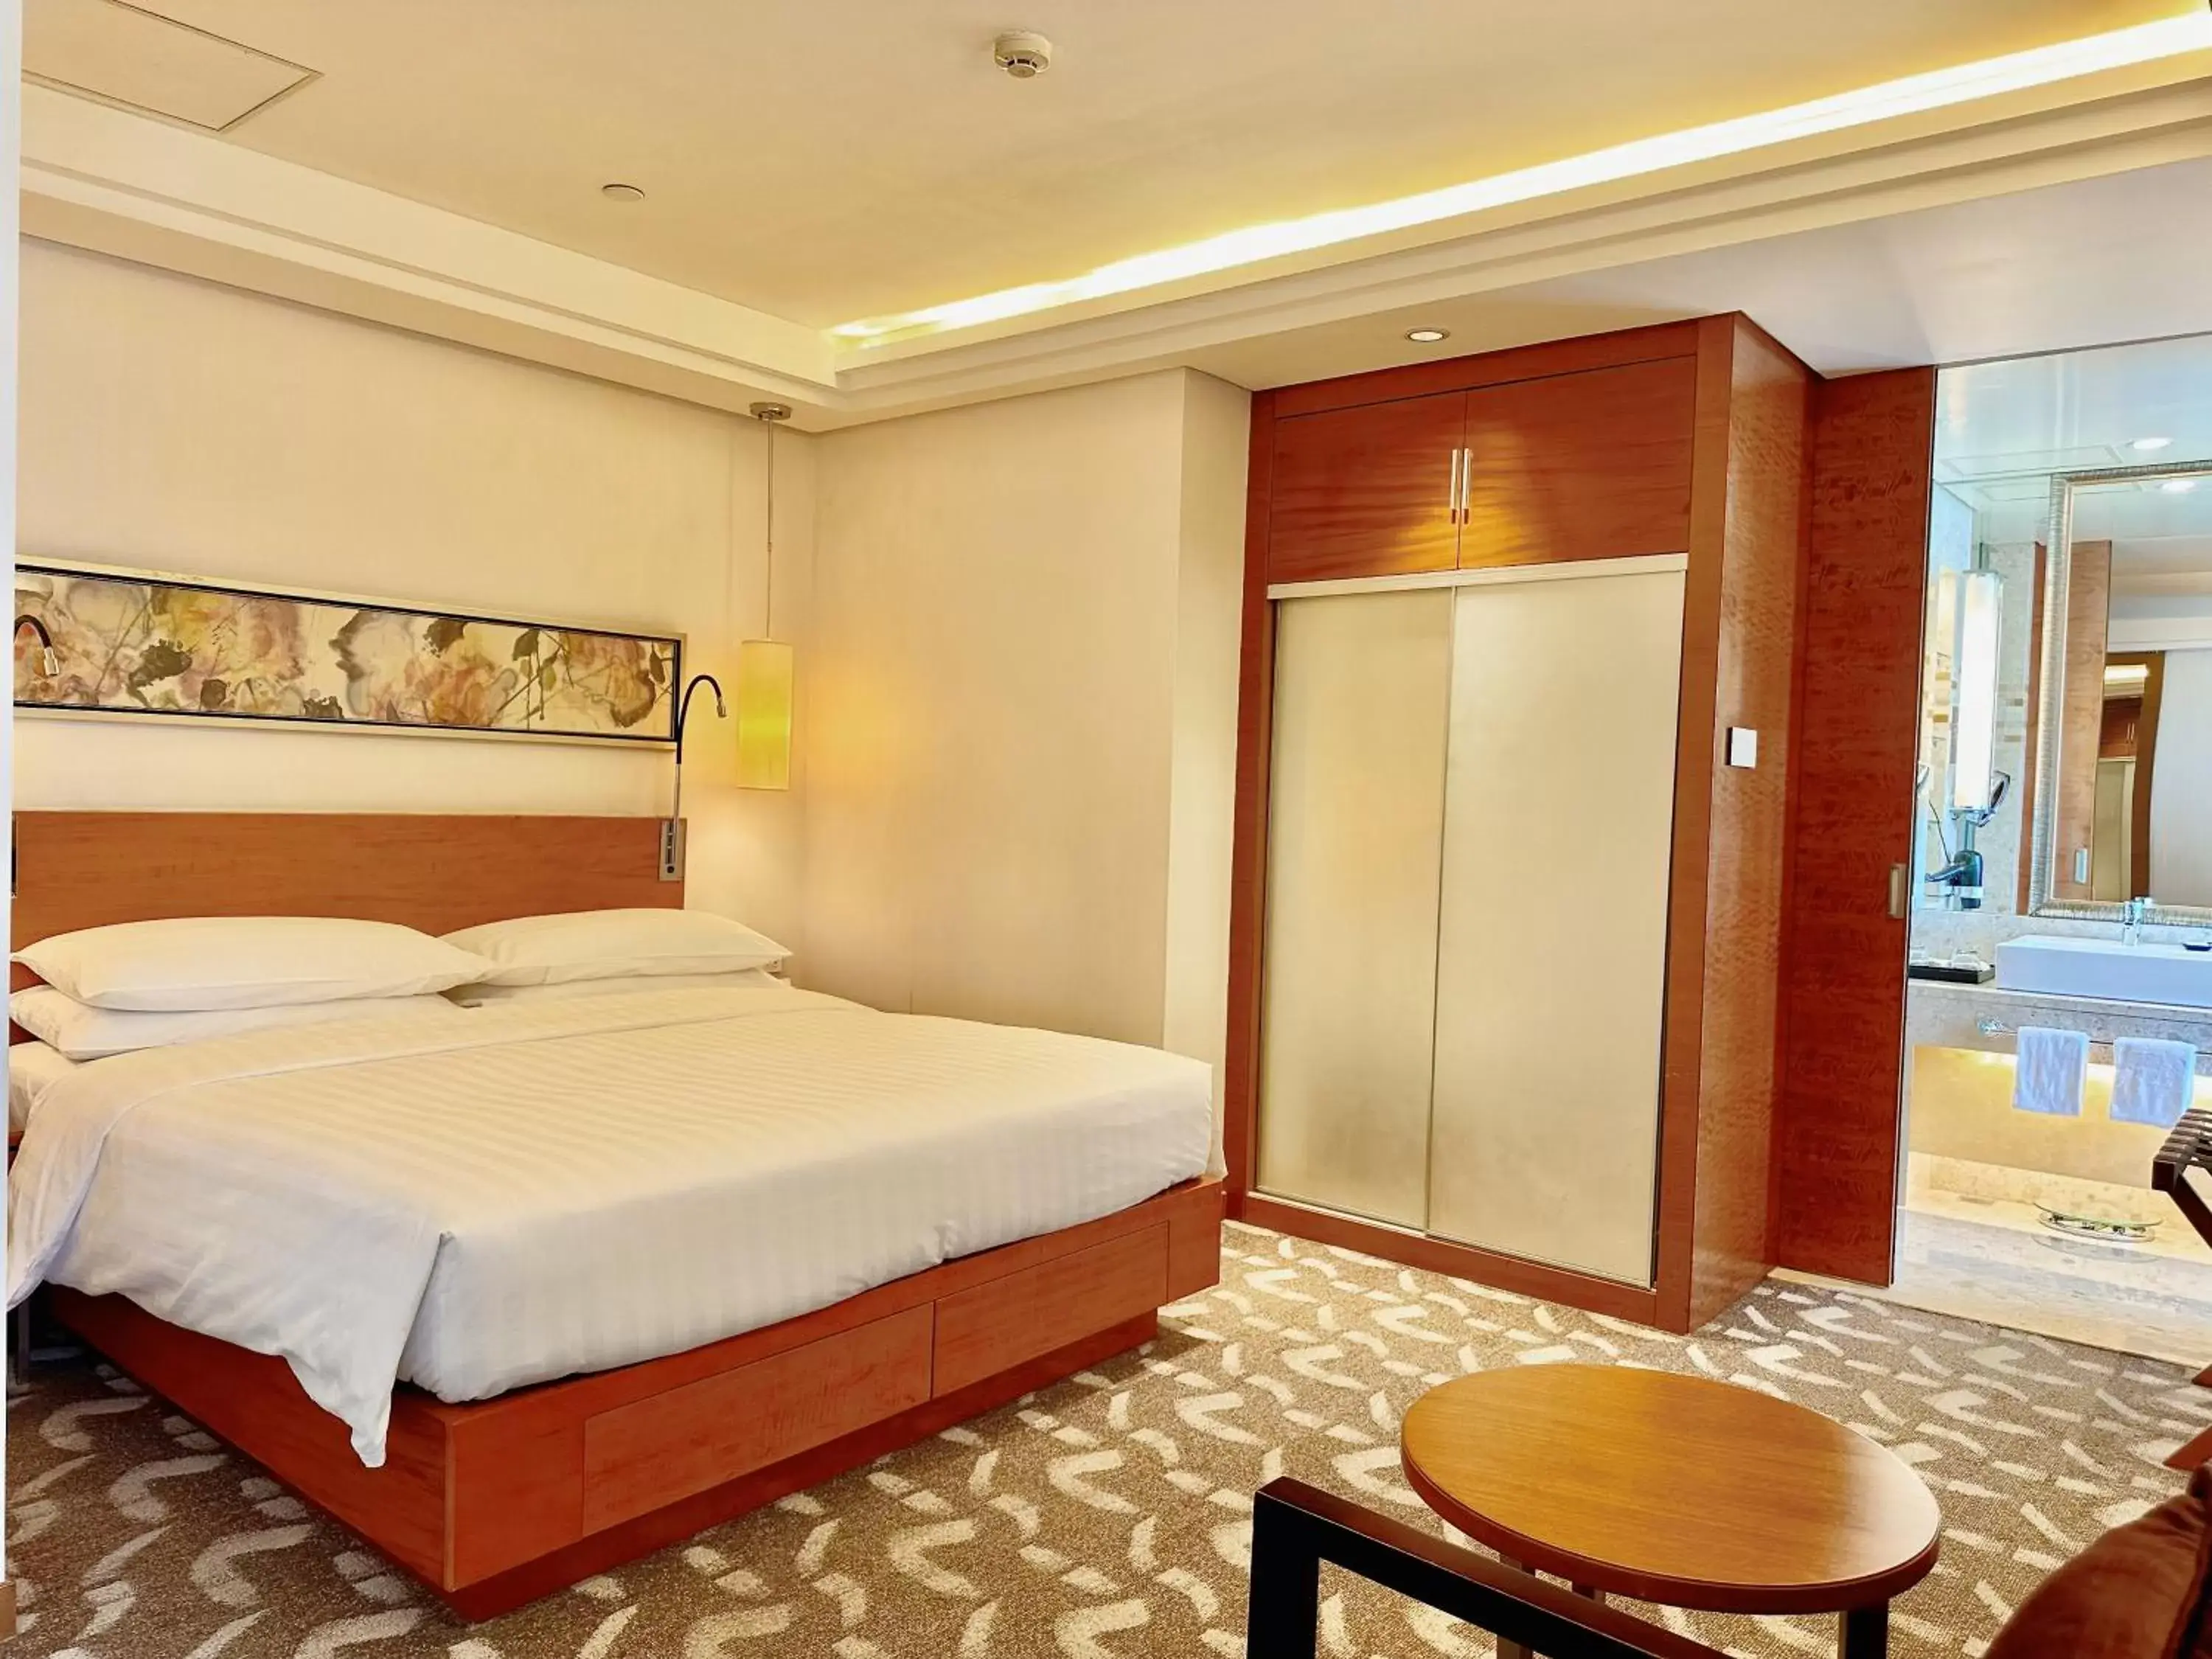 Bed in Swissotel Foshan, Guangdong - Free shuttle bus during canton fair complex during canton fair period